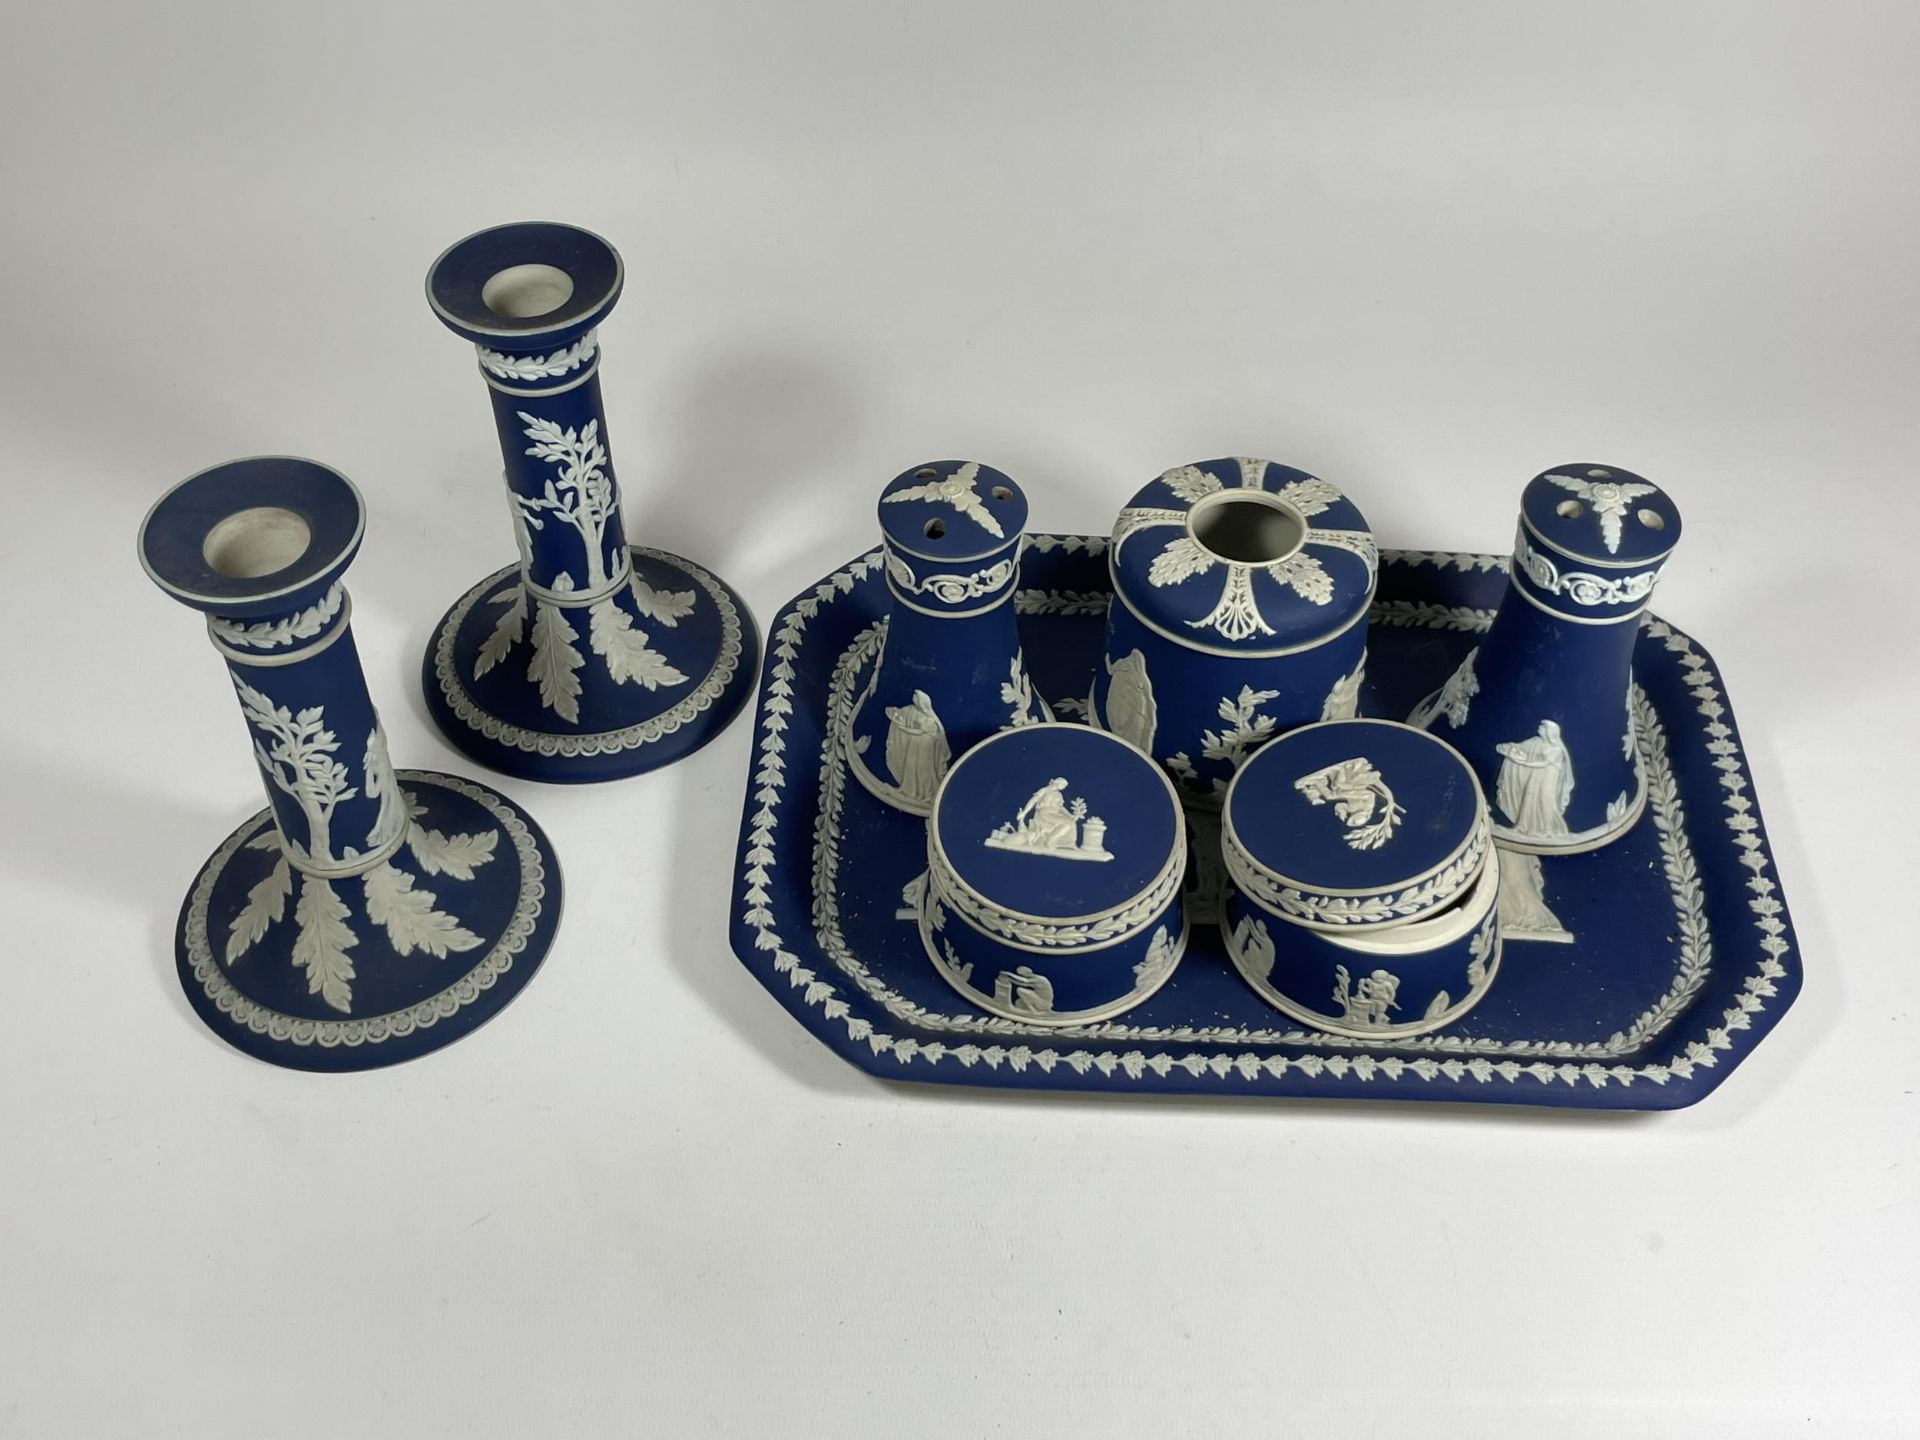 AN ADAMS JASPERWARE POTTERY DRESSING TABLE SET WITH A PAIR OF CANDLESTICKS